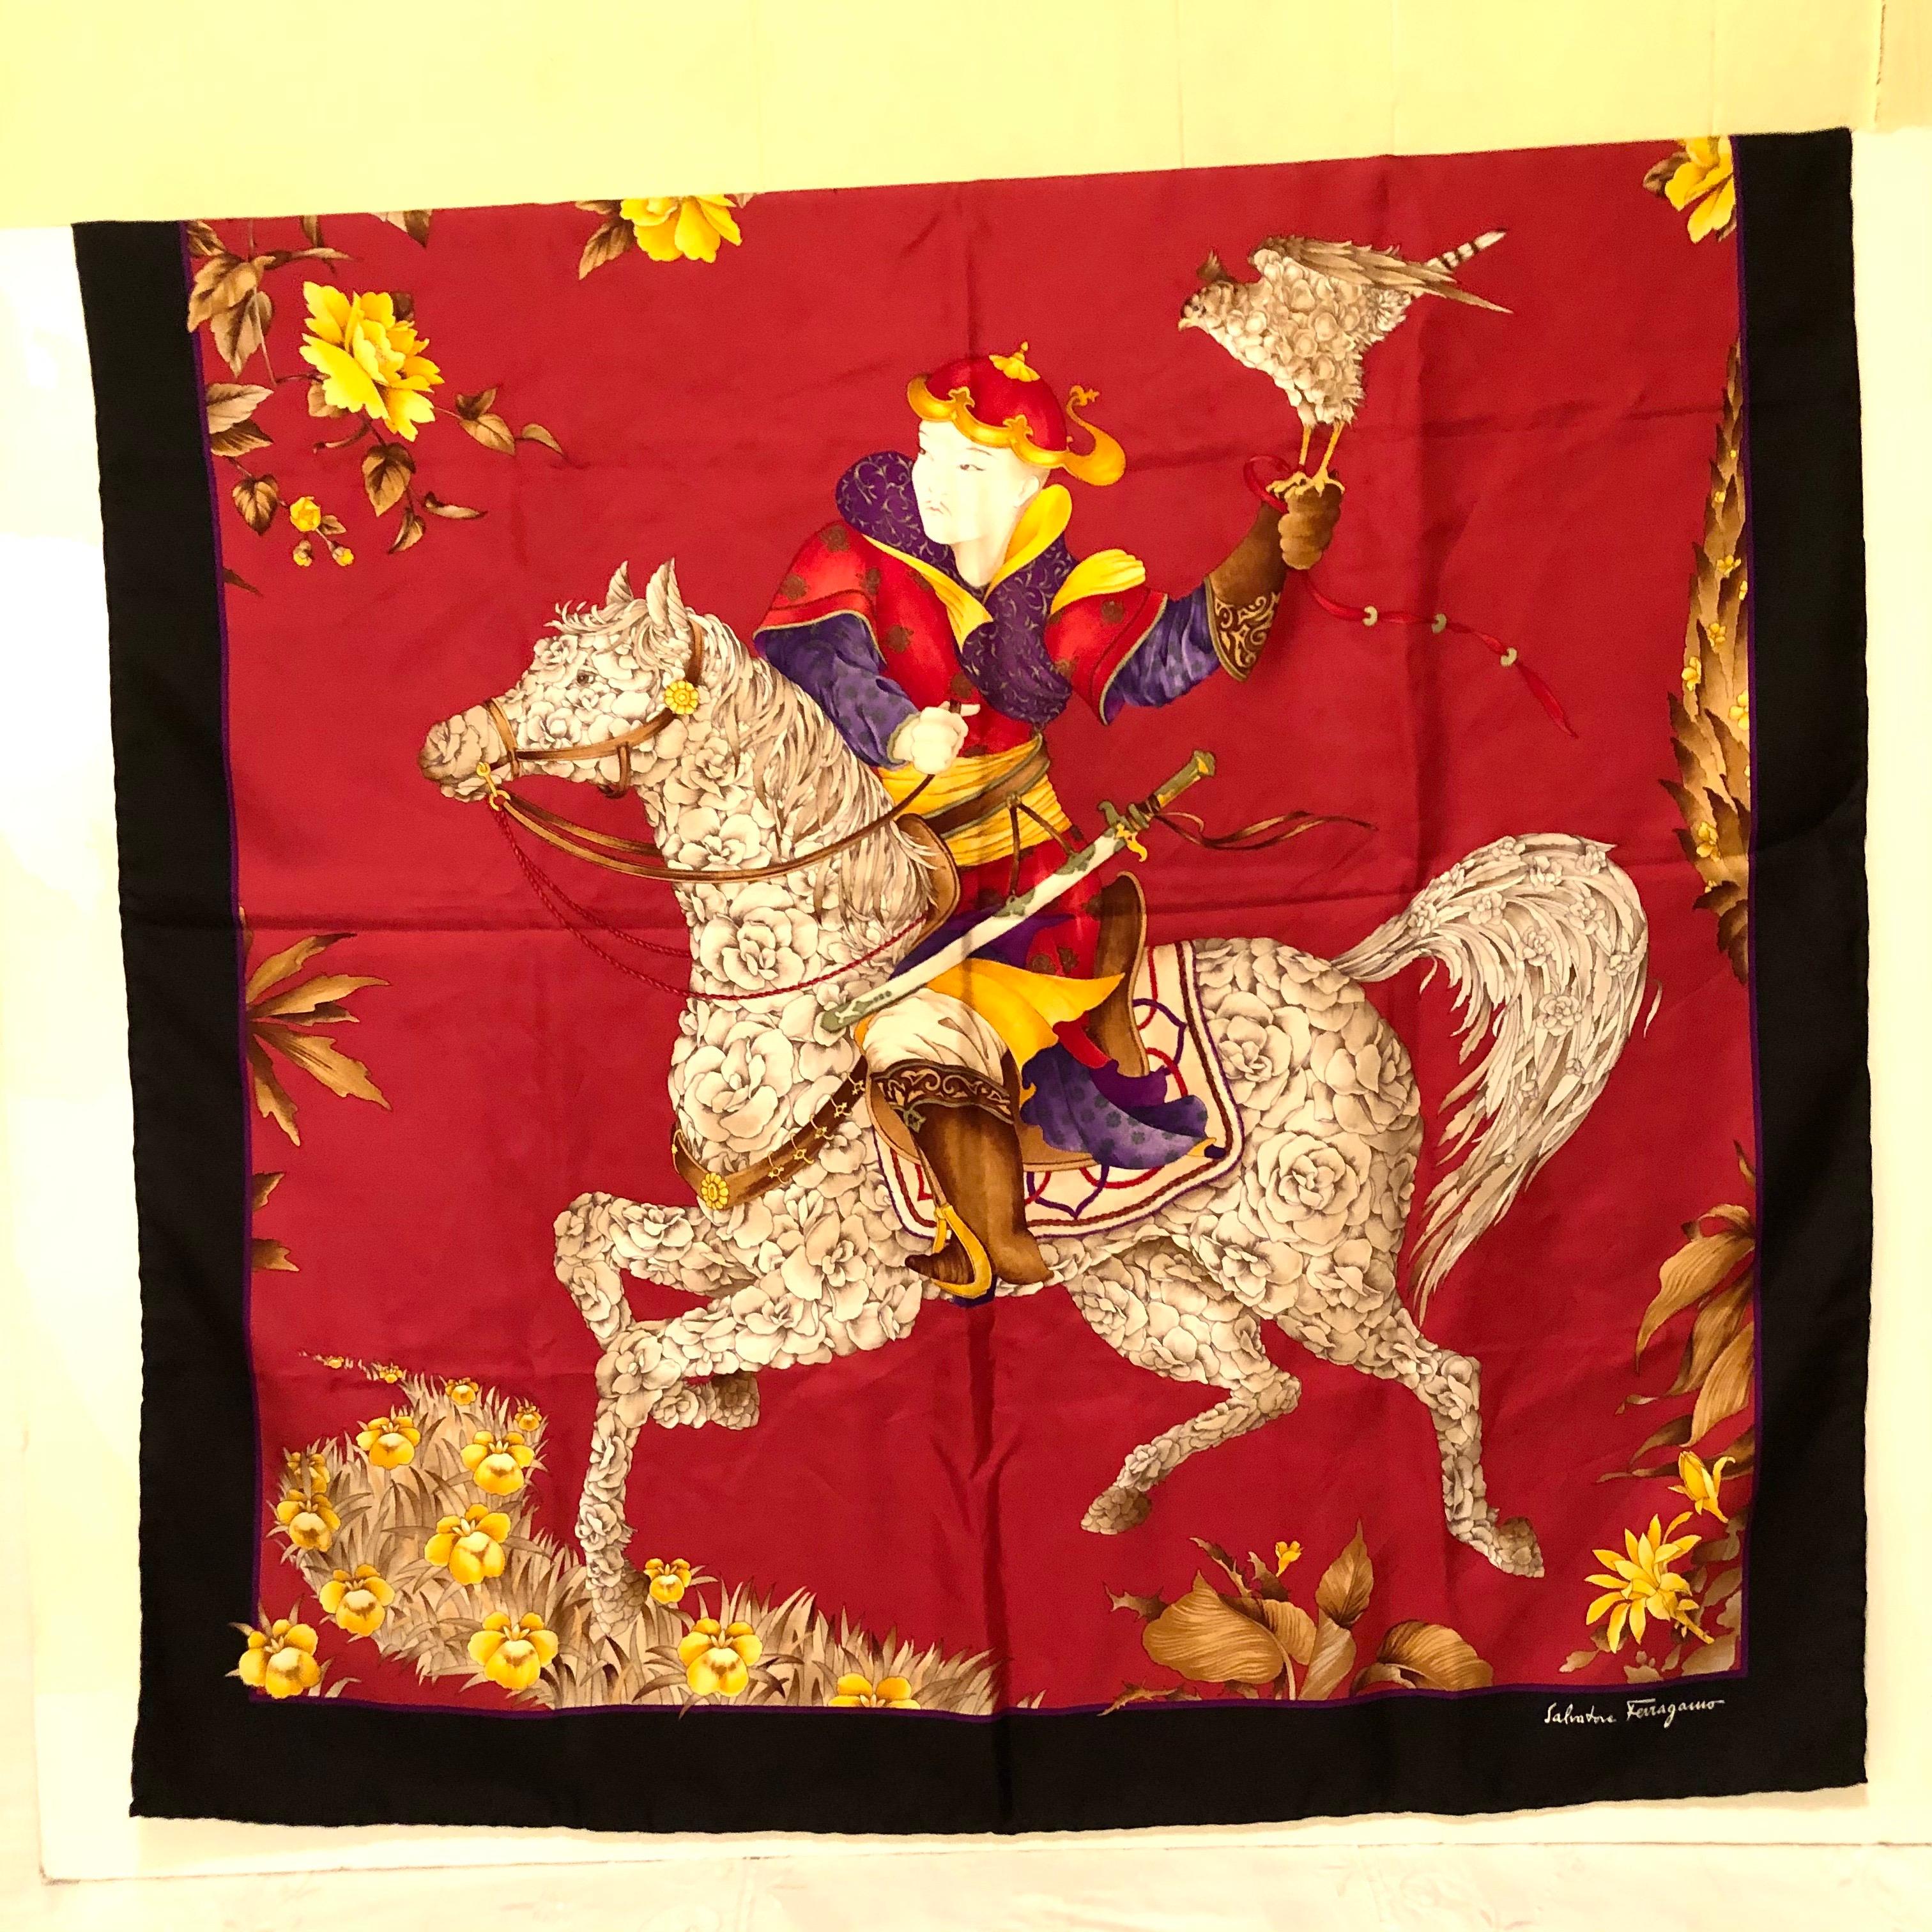 Contemporary Salvatore Ferragamo Red Silk Scarf with a Stunning Design of a Man on a Horse